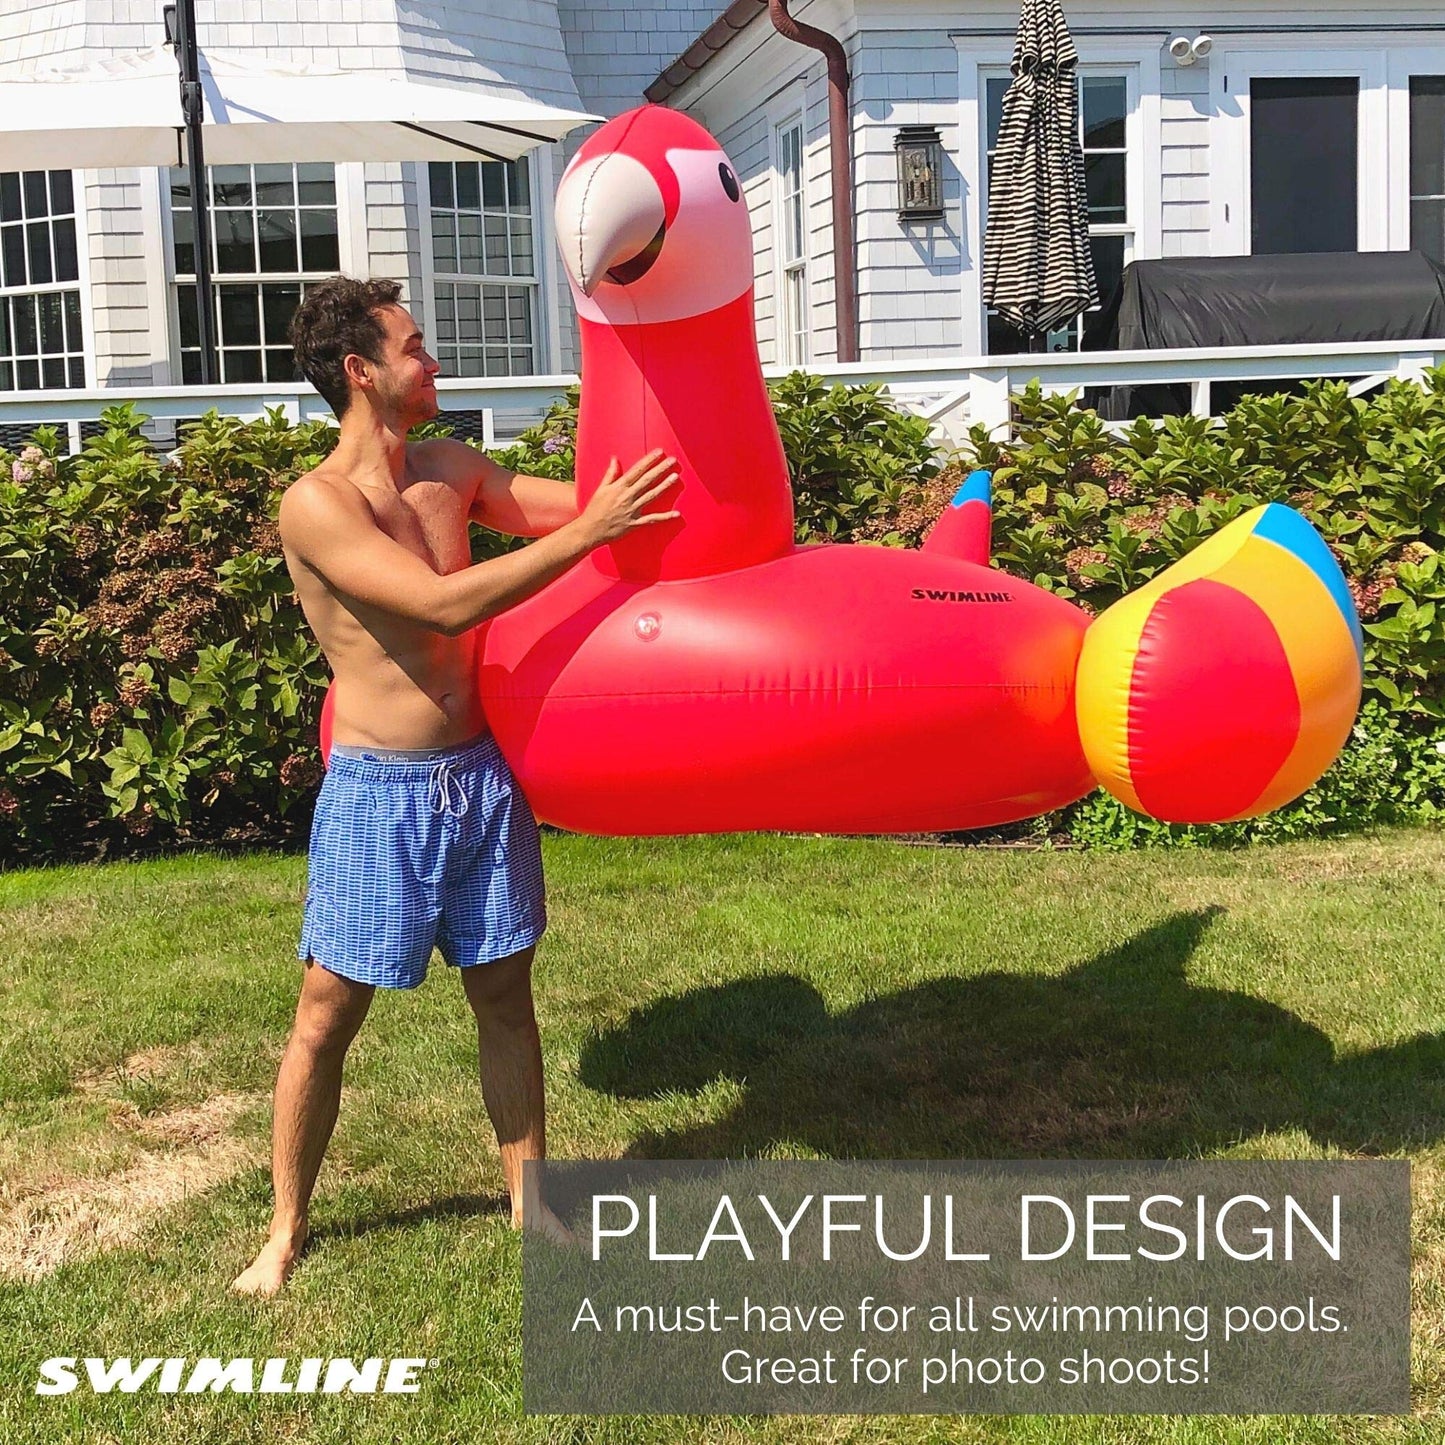 SWIMLINE Original Giant Ride On Inflatable Pool Float Lounge Series | Floaties W/Stable Legs Wings Large Rideable Blow Up Summer Beach Swimming Party Big Raft Tube Decoration Tan Toys for Kids Adults Parrot